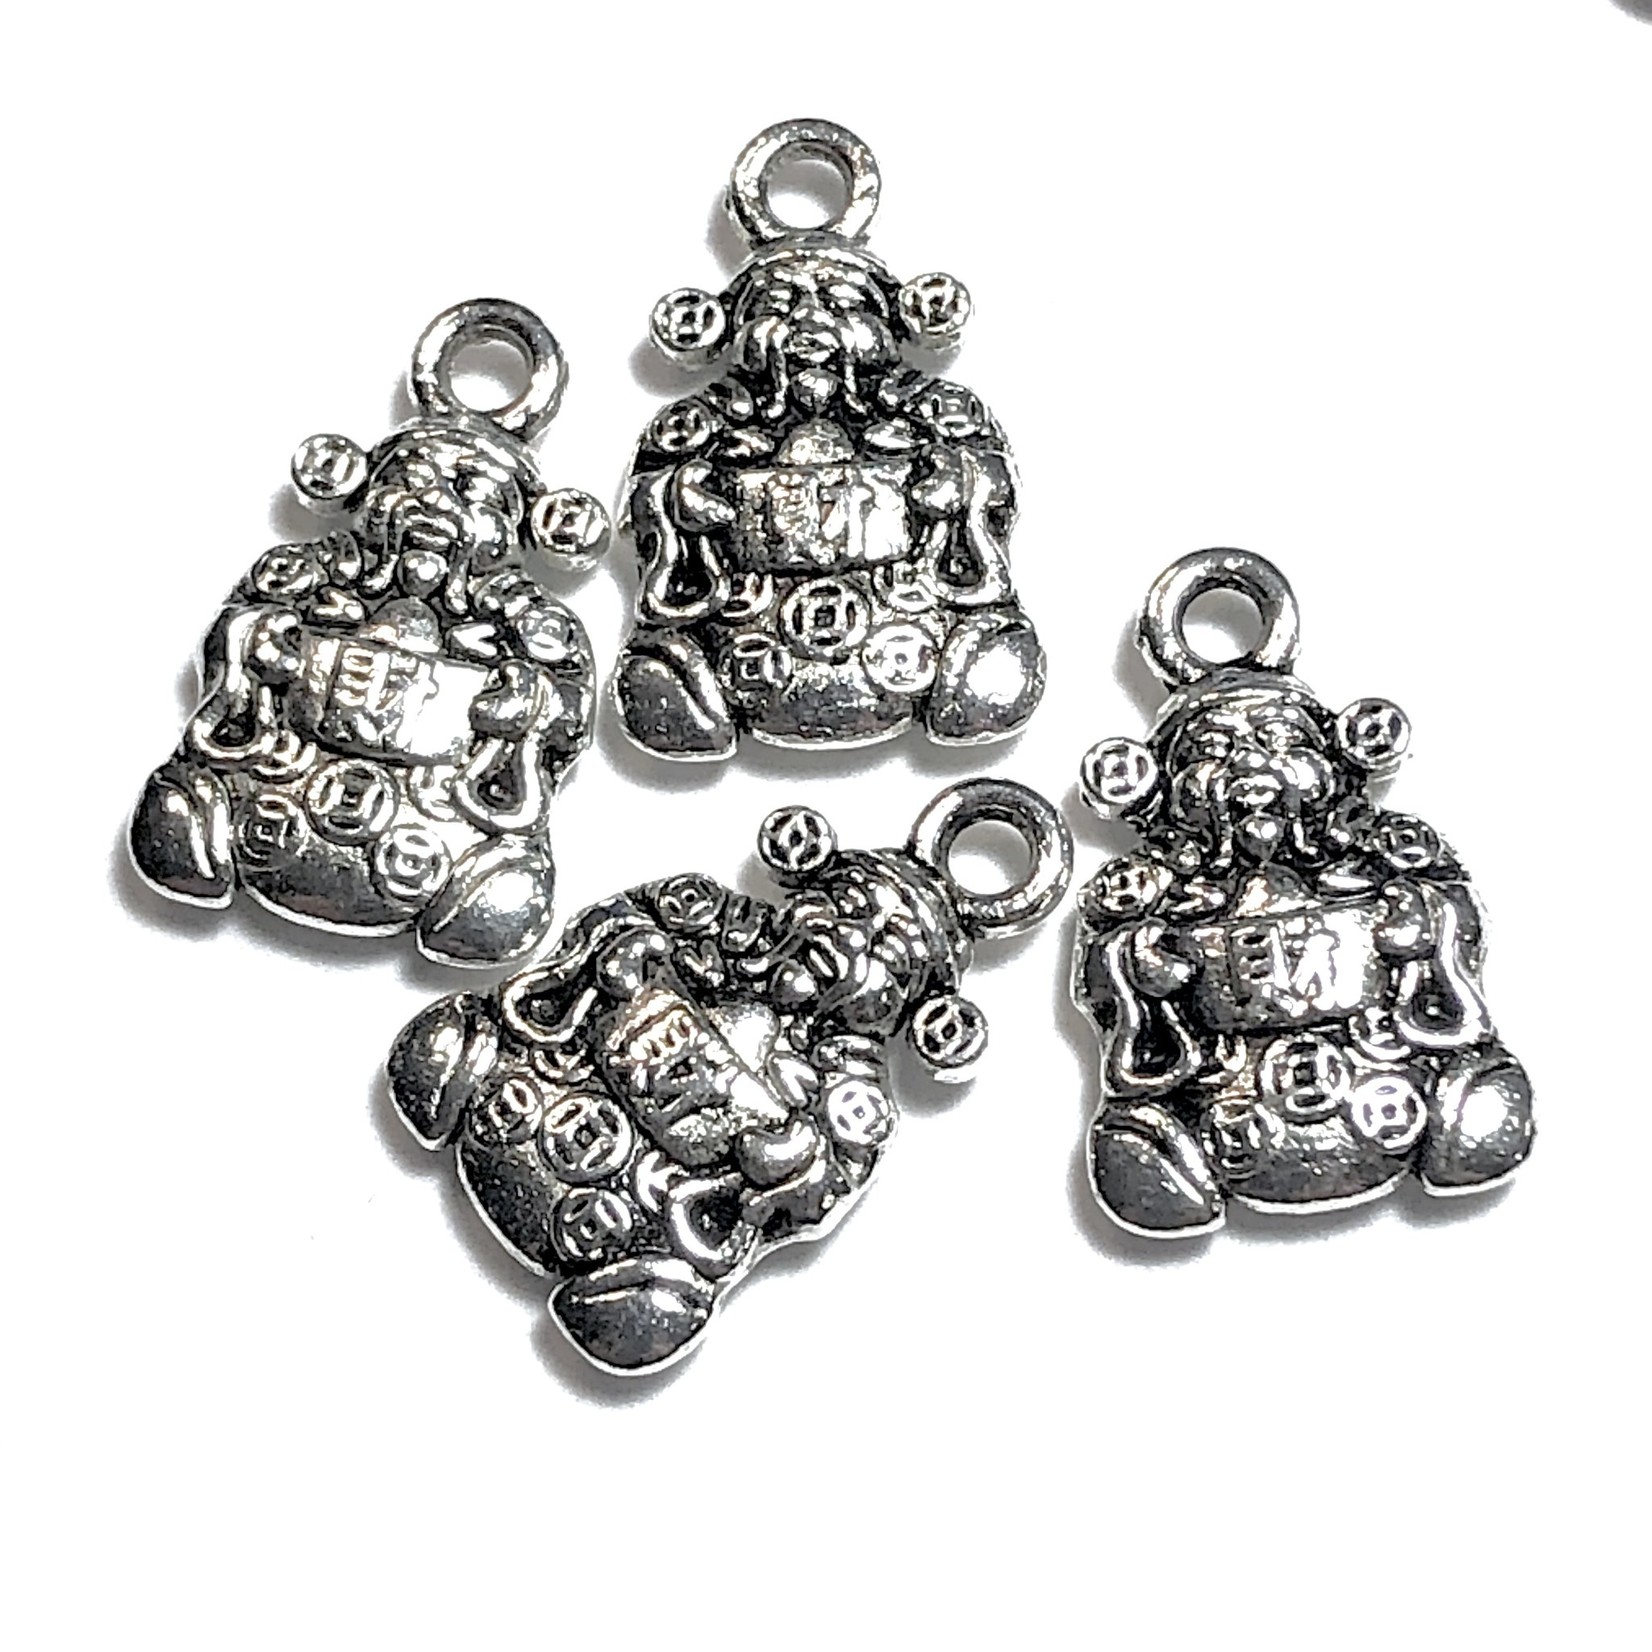 Tibetan Silver Alloy 18mm Chines God of Fortune Charm 12pcs